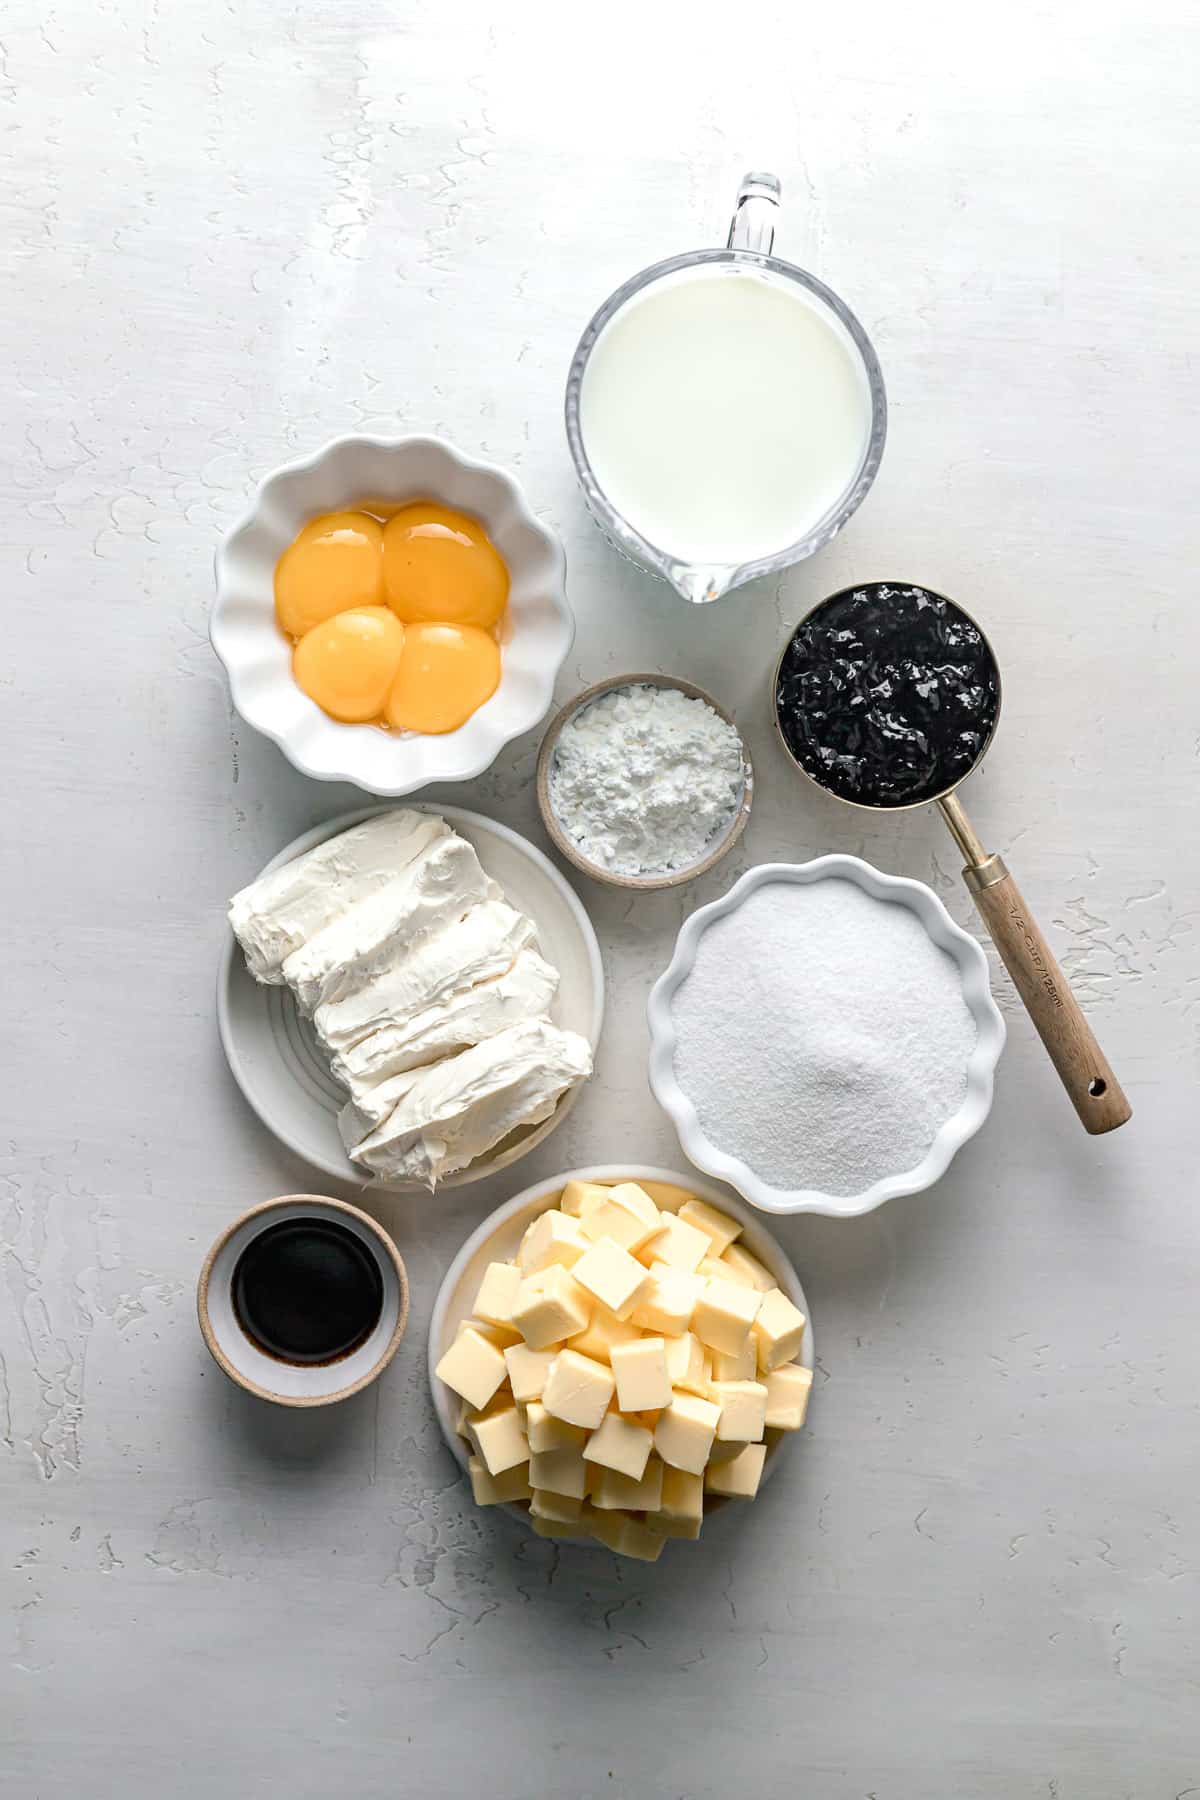 ingredients for the German buttercream.